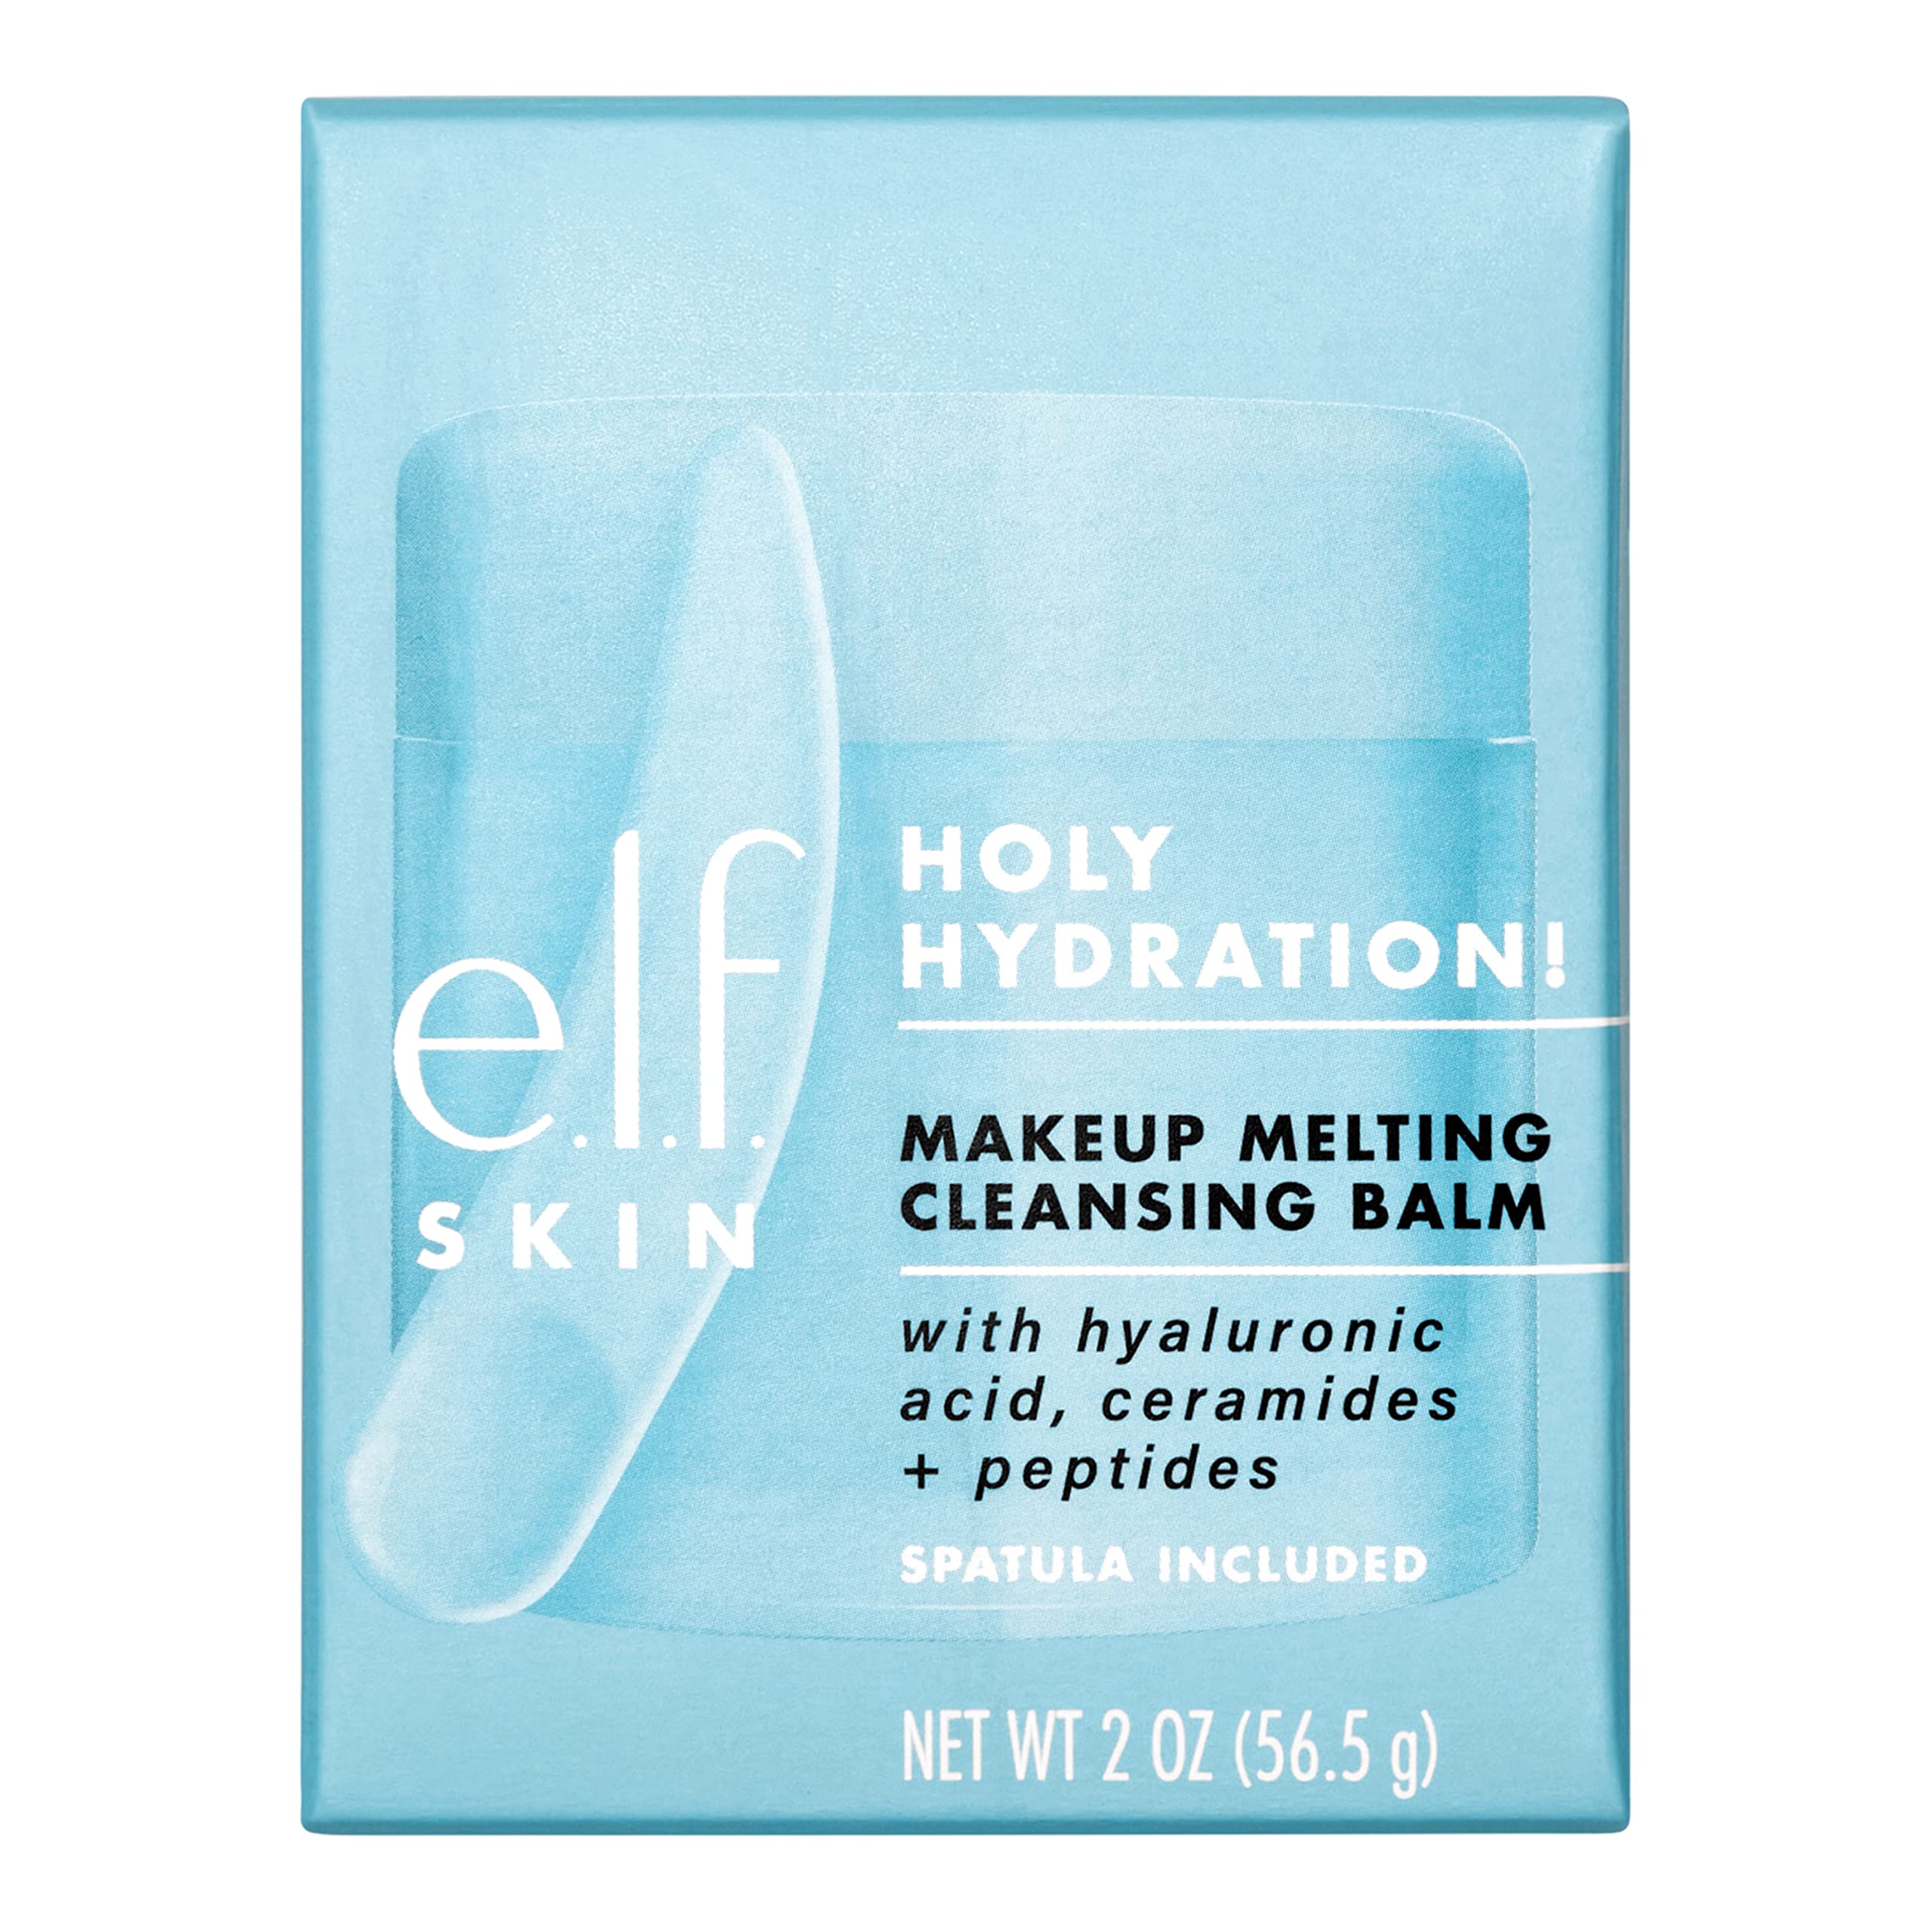 e.l.f. Holy Hydration! Makeup Melting Cleansing Balm, Face Cleanser & Makeup Remover, Infused with Hyaluronic Acid to Hydrate Skin, 2 Oz